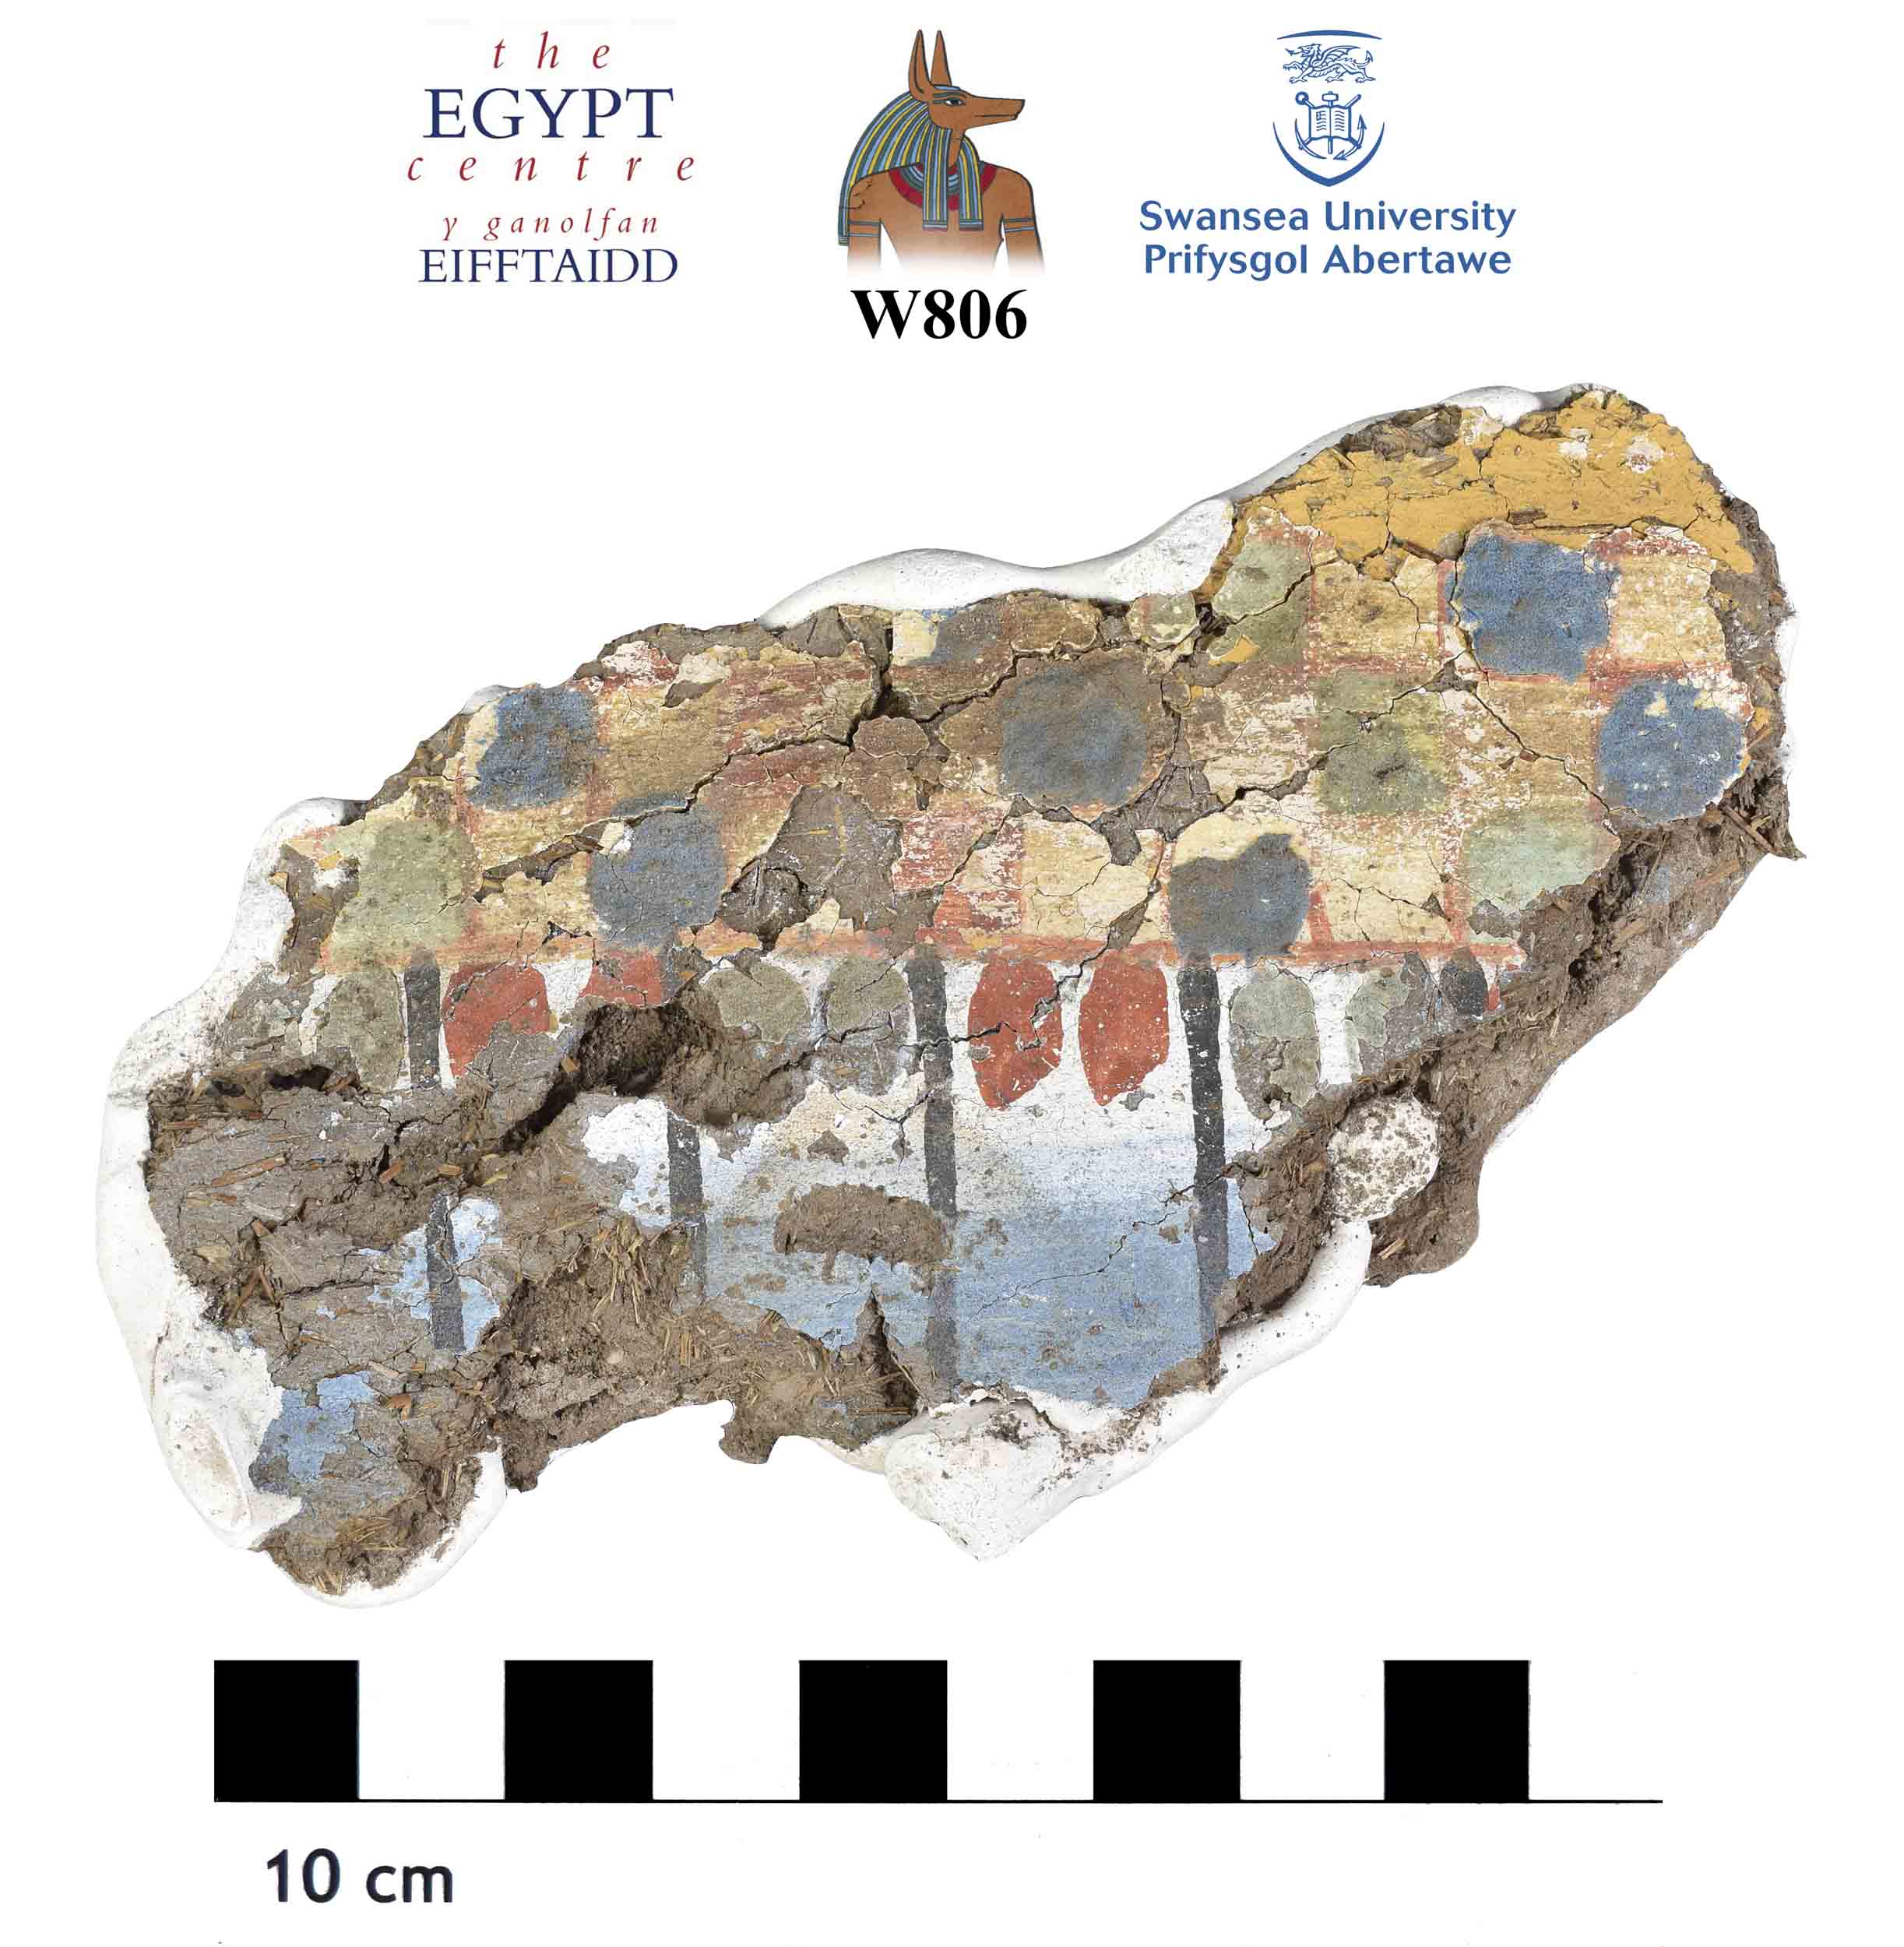 Image for: Fragment of wall plaster